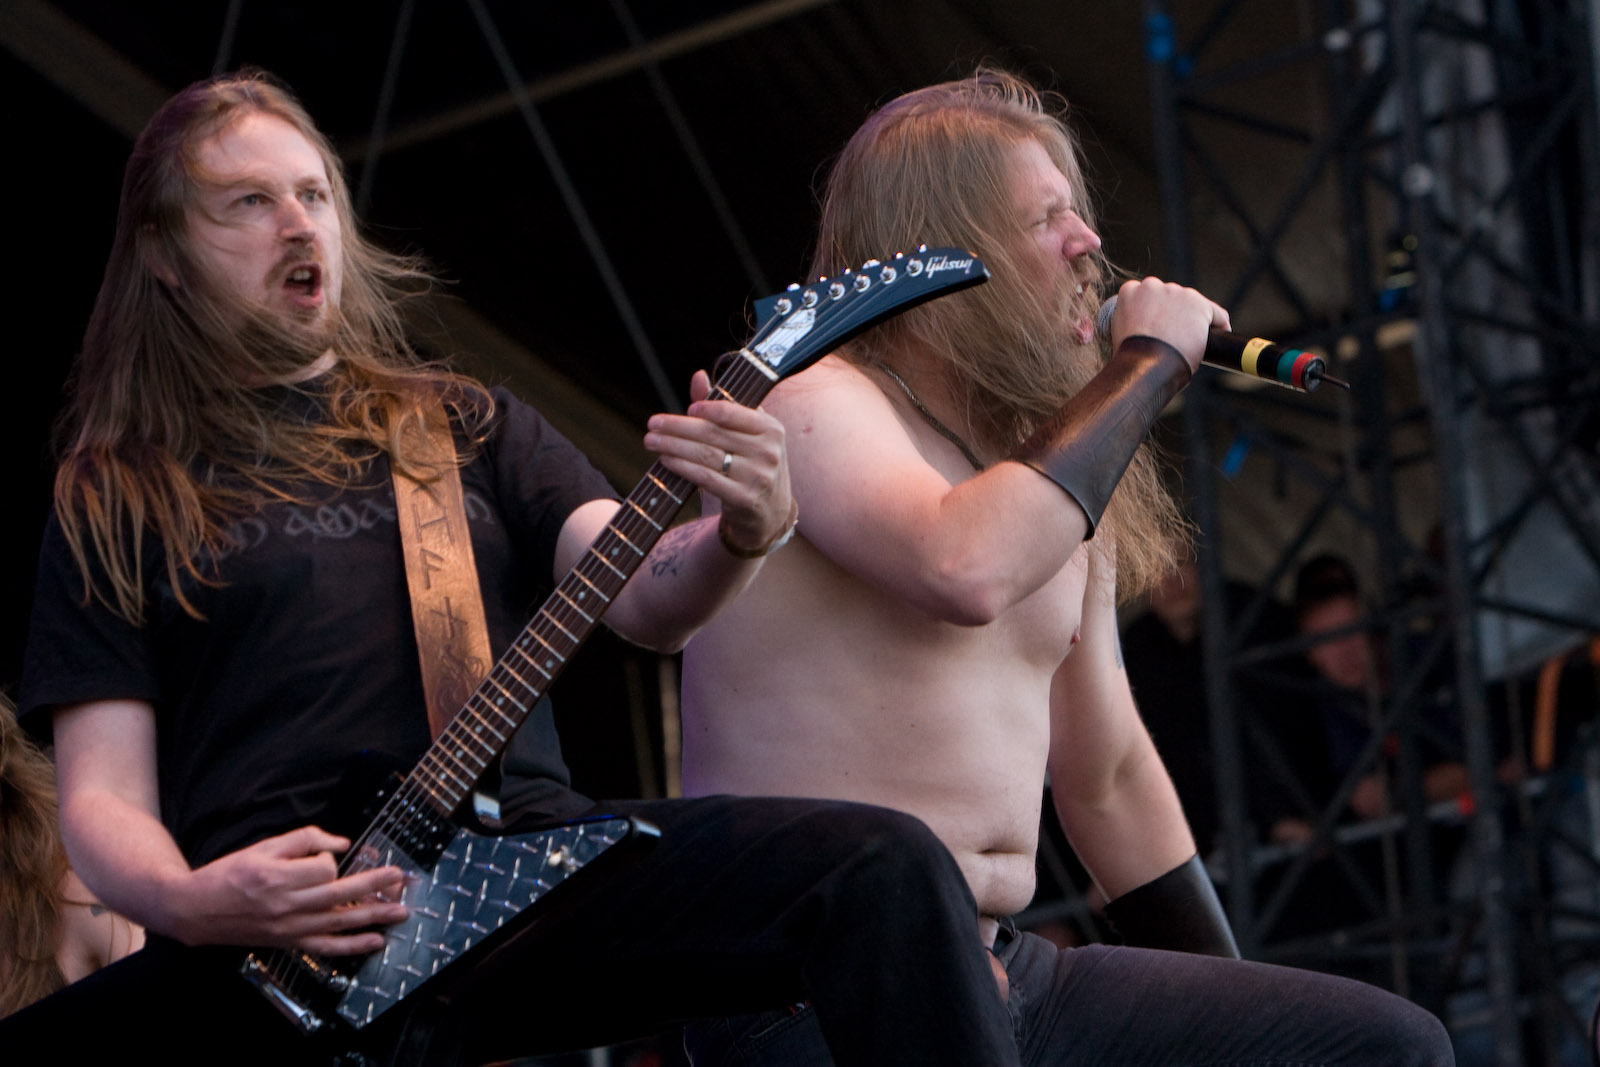 AMON AMARTH: "DECEIVER OF THE GODS" - NO CLEAN SINGING